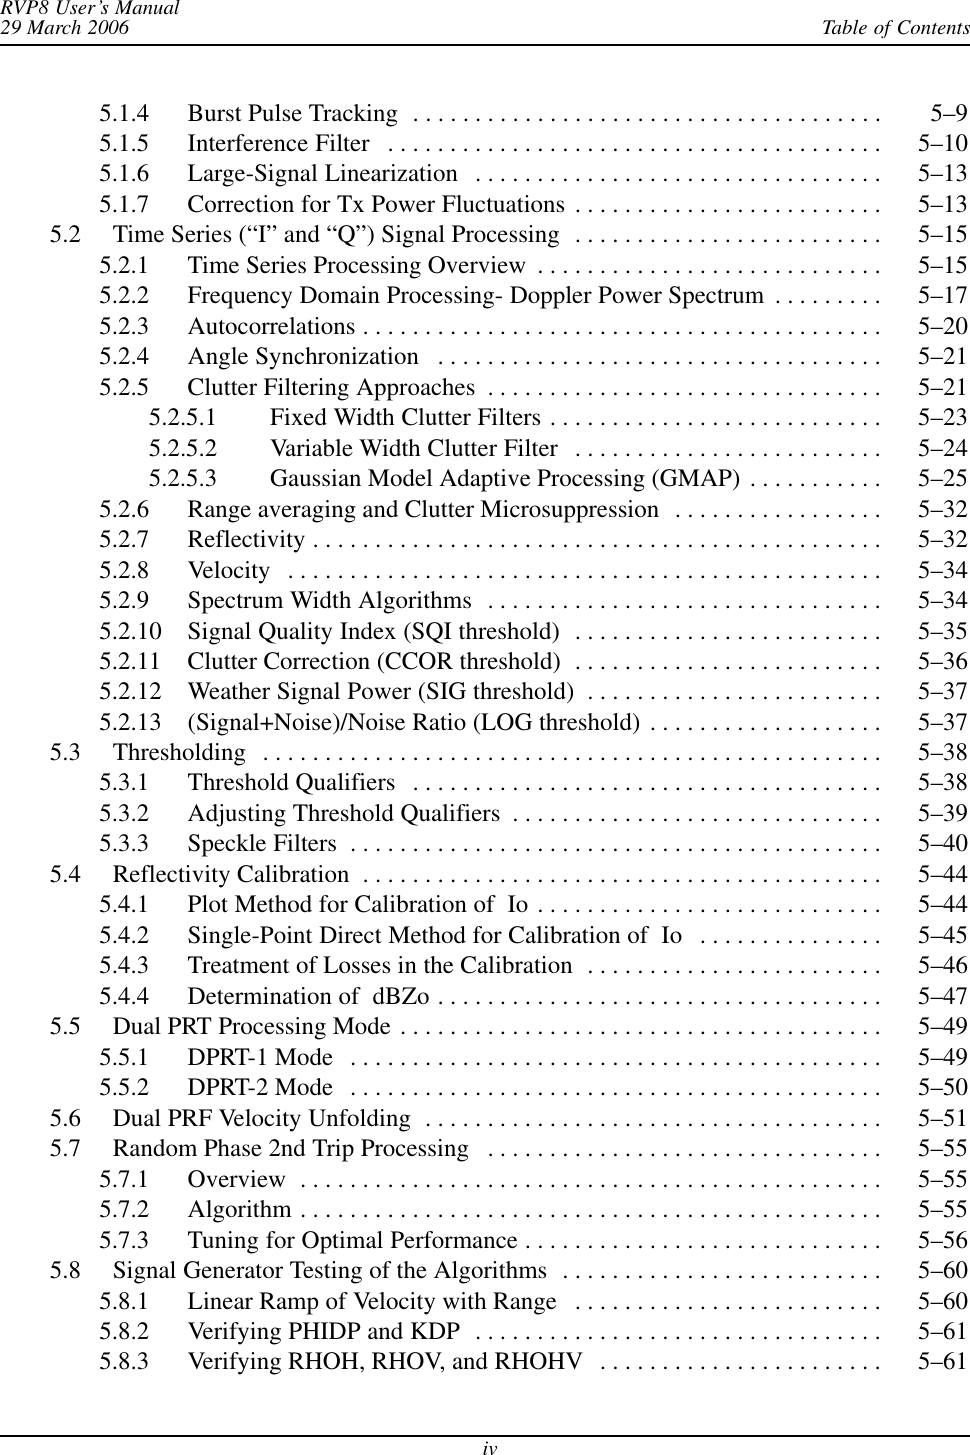 Table of ContentsRVP8 User’s Manual29 March 2006iv5.1.4 Burst Pulse Tracking 5–9 . . . . . . . . . . . . . . . . . . . . . . . . . . . . . . . . . . . . . . 5.1.5 Interference Filter 5–10 . . . . . . . . . . . . . . . . . . . . . . . . . . . . . . . . . . . . . . . . 5.1.6 Large-Signal Linearization 5–13 . . . . . . . . . . . . . . . . . . . . . . . . . . . . . . . . . 5.1.7 Correction for Tx Power Fluctuations 5–13 . . . . . . . . . . . . . . . . . . . . . . . . . 5.2 Time Series (“I” and “Q”) Signal Processing 5–15 . . . . . . . . . . . . . . . . . . . . . . . . . 5.2.1 Time Series Processing Overview 5–15 . . . . . . . . . . . . . . . . . . . . . . . . . . . . 5.2.2 Frequency Domain Processing- Doppler Power Spectrum 5–17 . . . . . . . . . 5.2.3 Autocorrelations 5–20 . . . . . . . . . . . . . . . . . . . . . . . . . . . . . . . . . . . . . . . . . . 5.2.4 Angle Synchronization 5–21 . . . . . . . . . . . . . . . . . . . . . . . . . . . . . . . . . . . . 5.2.5 Clutter Filtering Approaches 5–21 . . . . . . . . . . . . . . . . . . . . . . . . . . . . . . . . 5.2.5.1 Fixed Width Clutter Filters 5–23 . . . . . . . . . . . . . . . . . . . . . . . . . . . 5.2.5.2 Variable Width Clutter Filter 5–24 . . . . . . . . . . . . . . . . . . . . . . . . . 5.2.5.3 Gaussian Model Adaptive Processing (GMAP) 5–25 . . . . . . . . . . . 5.2.6 Range averaging and Clutter Microsuppression 5–32 . . . . . . . . . . . . . . . . . 5.2.7 Reflectivity 5–32 . . . . . . . . . . . . . . . . . . . . . . . . . . . . . . . . . . . . . . . . . . . . . . 5.2.8 Velocity 5–34 . . . . . . . . . . . . . . . . . . . . . . . . . . . . . . . . . . . . . . . . . . . . . . . . 5.2.9 Spectrum Width Algorithms 5–34 . . . . . . . . . . . . . . . . . . . . . . . . . . . . . . . . 5.2.10 Signal Quality Index (SQI threshold) 5–35 . . . . . . . . . . . . . . . . . . . . . . . . . 5.2.11 Clutter Correction (CCOR threshold) 5–36 . . . . . . . . . . . . . . . . . . . . . . . . . 5.2.12 Weather Signal Power (SIG threshold) 5–37 . . . . . . . . . . . . . . . . . . . . . . . . 5.2.13 (Signal+Noise)/Noise Ratio (LOG threshold) 5–37 . . . . . . . . . . . . . . . . . . . 5.3 Thresholding 5–38 . . . . . . . . . . . . . . . . . . . . . . . . . . . . . . . . . . . . . . . . . . . . . . . . . . 5.3.1 Threshold Qualifiers 5–38 . . . . . . . . . . . . . . . . . . . . . . . . . . . . . . . . . . . . . . 5.3.2 Adjusting Threshold Qualifiers 5–39 . . . . . . . . . . . . . . . . . . . . . . . . . . . . . . 5.3.3 Speckle Filters 5–40 . . . . . . . . . . . . . . . . . . . . . . . . . . . . . . . . . . . . . . . . . . . 5.4 Reflectivity Calibration 5–44 . . . . . . . . . . . . . . . . . . . . . . . . . . . . . . . . . . . . . . . . . . 5.4.1 Plot Method for Calibration of  Io 5–44 . . . . . . . . . . . . . . . . . . . . . . . . . . . . 5.4.2 Single-Point Direct Method for Calibration of  Io 5–45 . . . . . . . . . . . . . . . 5.4.3 Treatment of Losses in the Calibration 5–46 . . . . . . . . . . . . . . . . . . . . . . . . 5.4.4 Determination of  dBZo 5–47 . . . . . . . . . . . . . . . . . . . . . . . . . . . . . . . . . . . . 5.5 Dual PRT Processing Mode 5–49 . . . . . . . . . . . . . . . . . . . . . . . . . . . . . . . . . . . . . . . 5.5.1 DPRT-1 Mode 5–49 . . . . . . . . . . . . . . . . . . . . . . . . . . . . . . . . . . . . . . . . . . . 5.5.2 DPRT-2 Mode 5–50 . . . . . . . . . . . . . . . . . . . . . . . . . . . . . . . . . . . . . . . . . . . 5.6 Dual PRF Velocity Unfolding 5–51 . . . . . . . . . . . . . . . . . . . . . . . . . . . . . . . . . . . . . 5.7 Random Phase 2nd Trip Processing 5–55 . . . . . . . . . . . . . . . . . . . . . . . . . . . . . . . . 5.7.1 Overview 5–55 . . . . . . . . . . . . . . . . . . . . . . . . . . . . . . . . . . . . . . . . . . . . . . . 5.7.2 Algorithm 5–55 . . . . . . . . . . . . . . . . . . . . . . . . . . . . . . . . . . . . . . . . . . . . . . . 5.7.3 Tuning for Optimal Performance 5–56 . . . . . . . . . . . . . . . . . . . . . . . . . . . . . 5.8 Signal Generator Testing of the Algorithms 5–60 . . . . . . . . . . . . . . . . . . . . . . . . . . 5.8.1 Linear Ramp of Velocity with Range 5–60 . . . . . . . . . . . . . . . . . . . . . . . . . 5.8.2 Verifying PHIDP and KDP 5–61 . . . . . . . . . . . . . . . . . . . . . . . . . . . . . . . . . 5.8.3 Verifying RHOH, RHOV, and RHOHV 5–61 . . . . . . . . . . . . . . . . . . . . . . . 